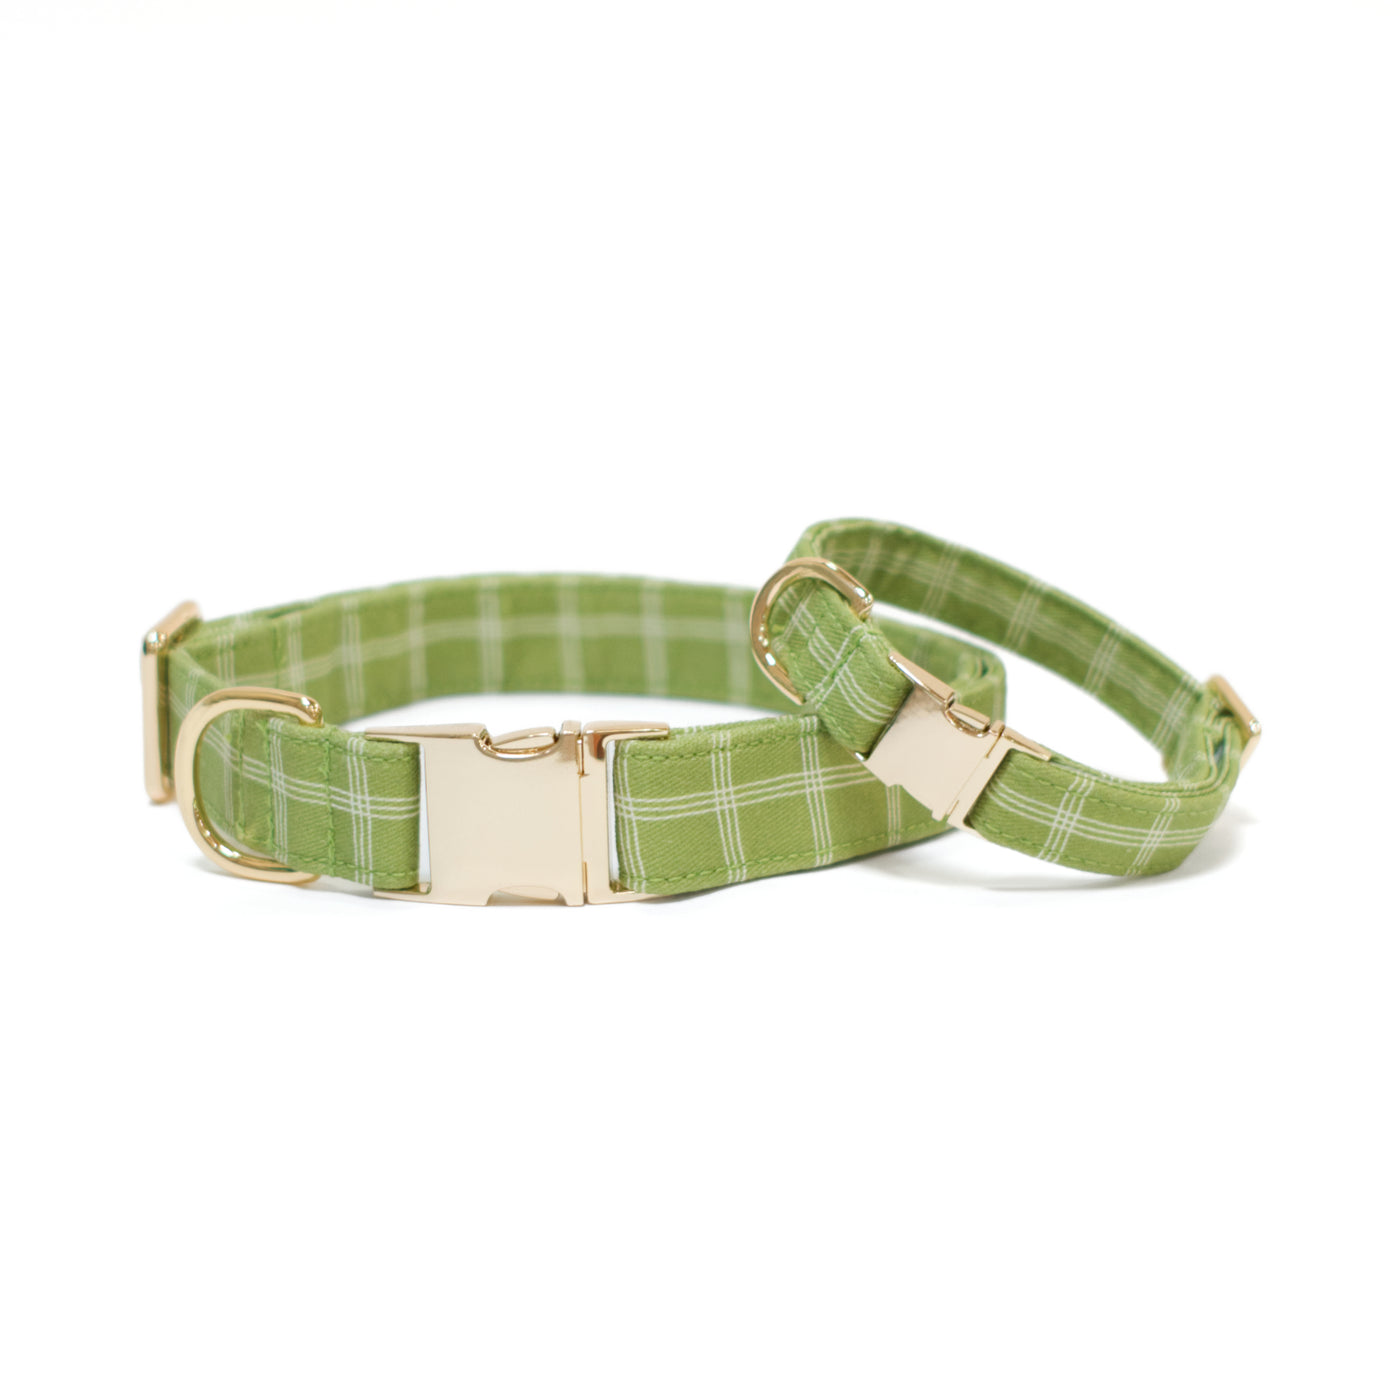 Olive green plaid dog collars with gold hardware